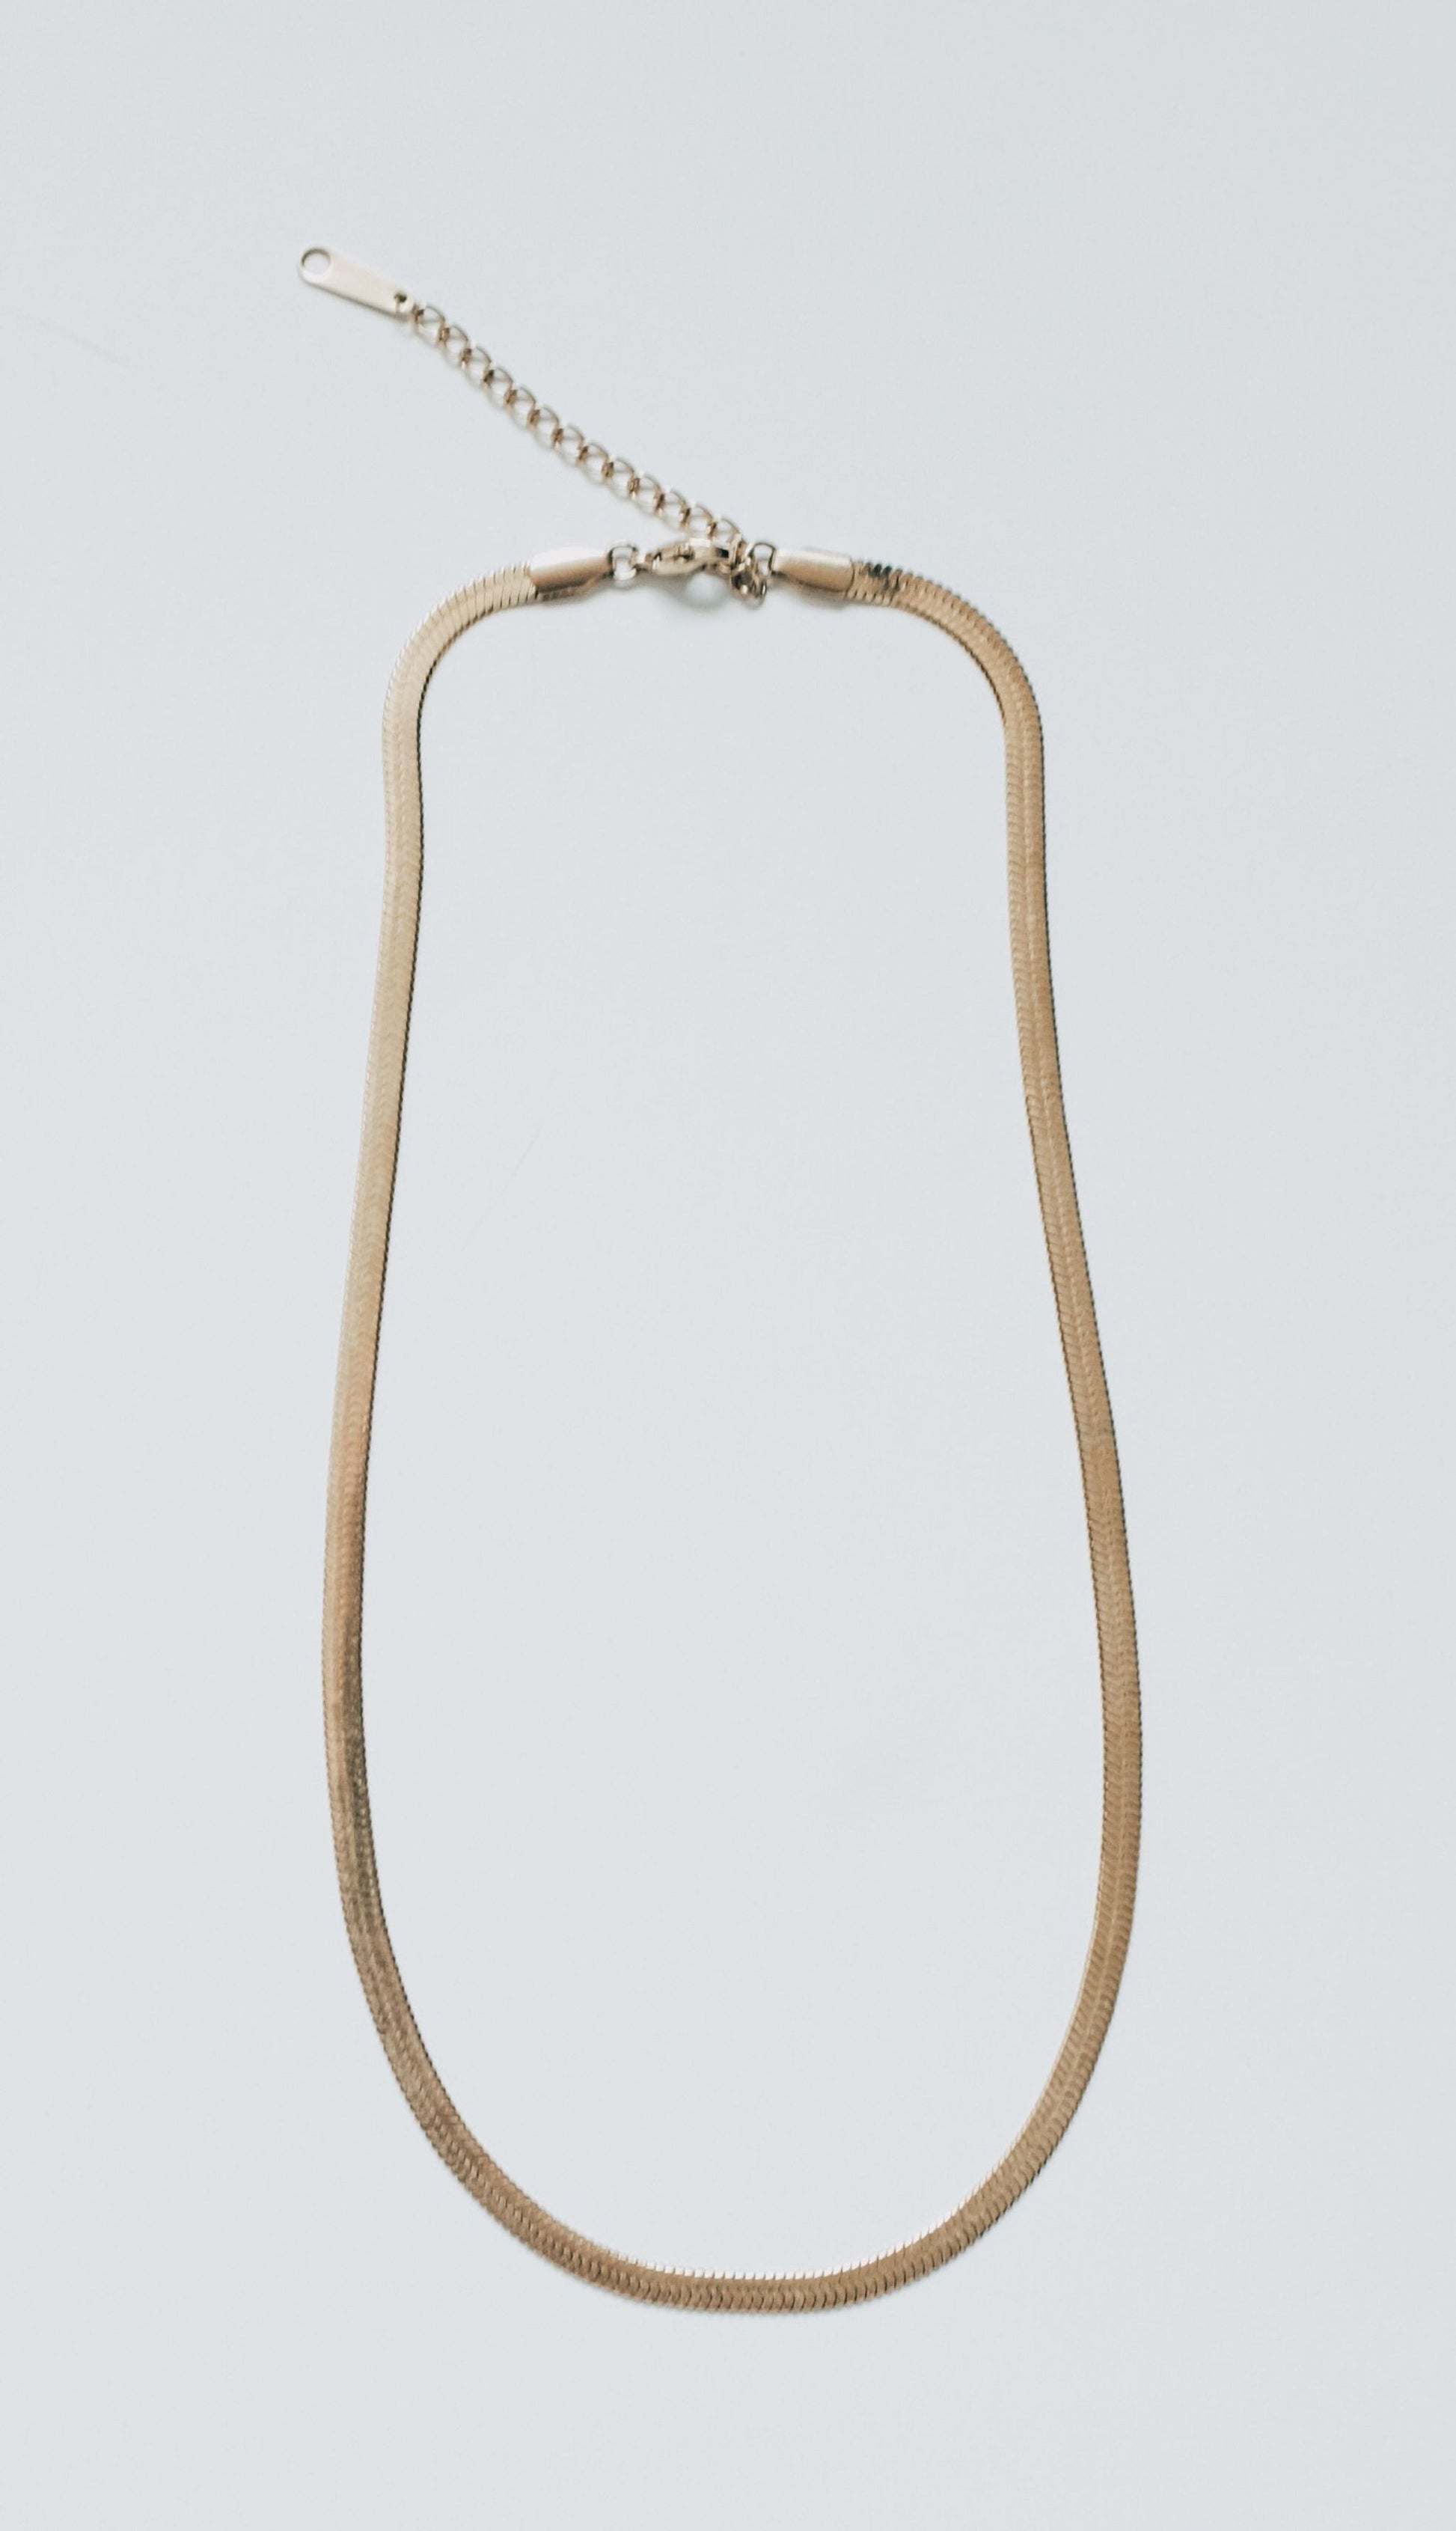 ethical fair trade gold necklace jewelry accessories anti-trafficking 